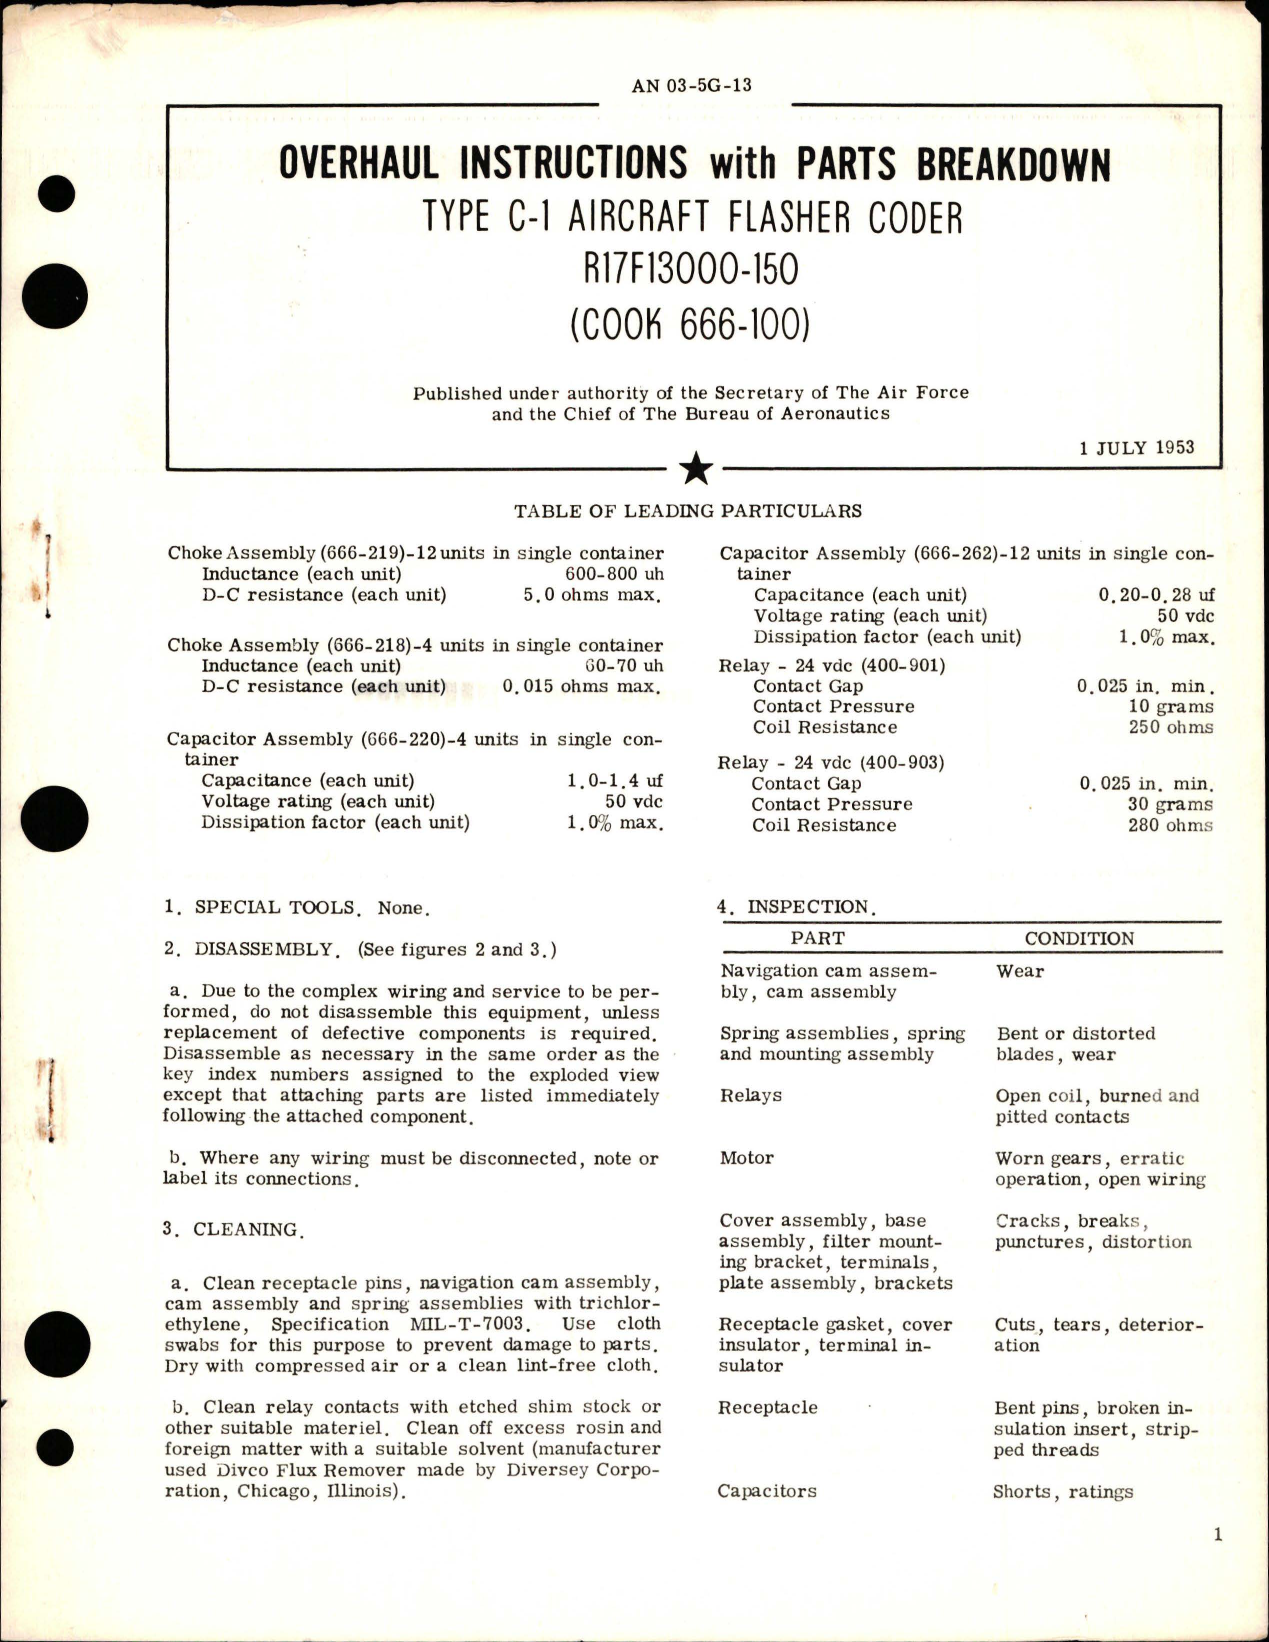 Sample page 1 from AirCorps Library document: Overhaul Instructions with Parts Breakdown for Flasher Coder - Type C-1 - R17F13000-150 